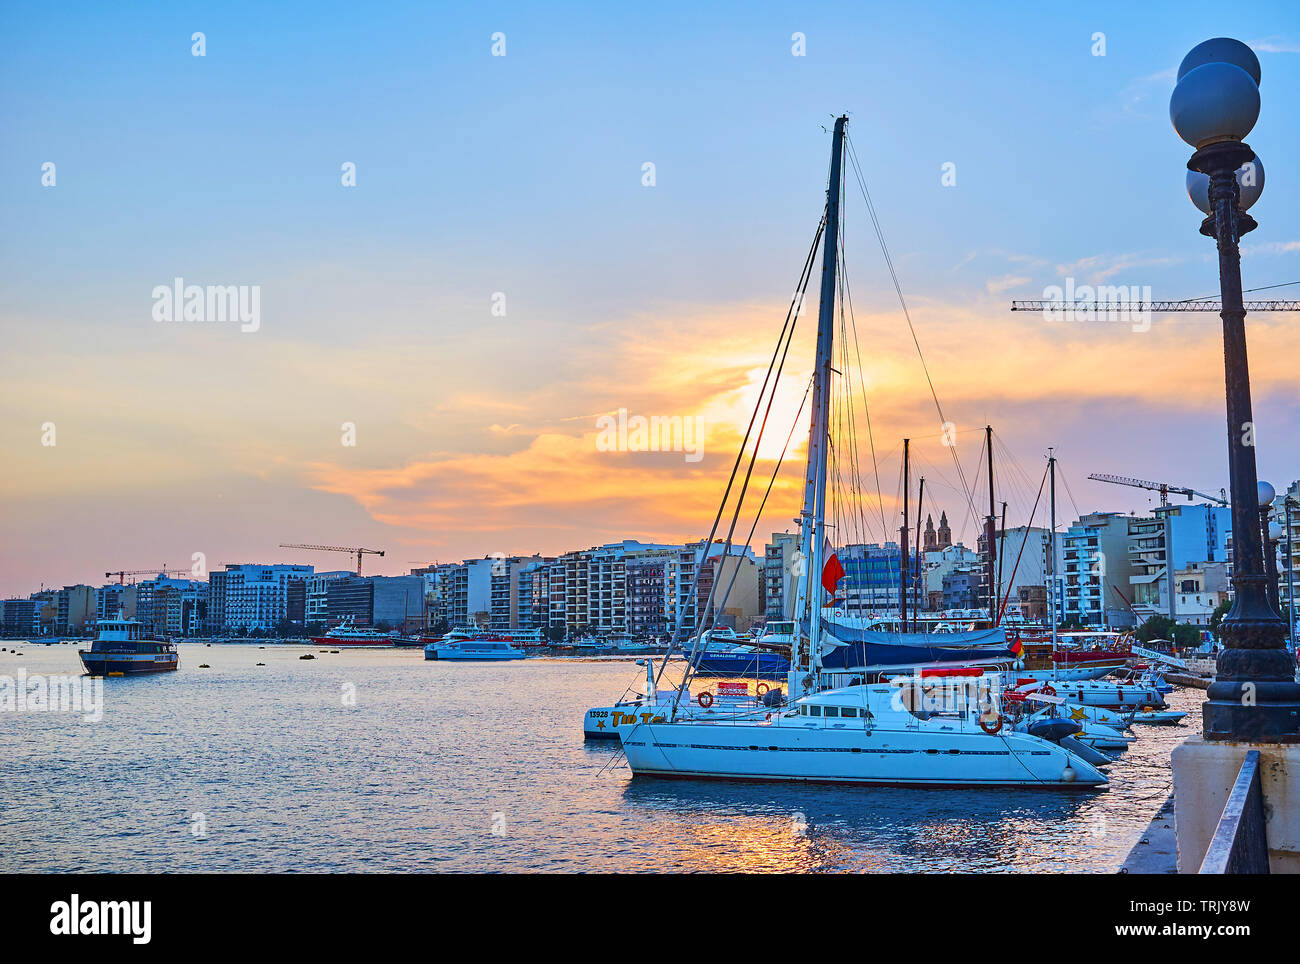 SLIEMA, MALTA - JUNE 19, 2018: The evening walk along the Sliema waterfront with a view on line of modern buildings, sail yachts and the bright sunset Stock Photo